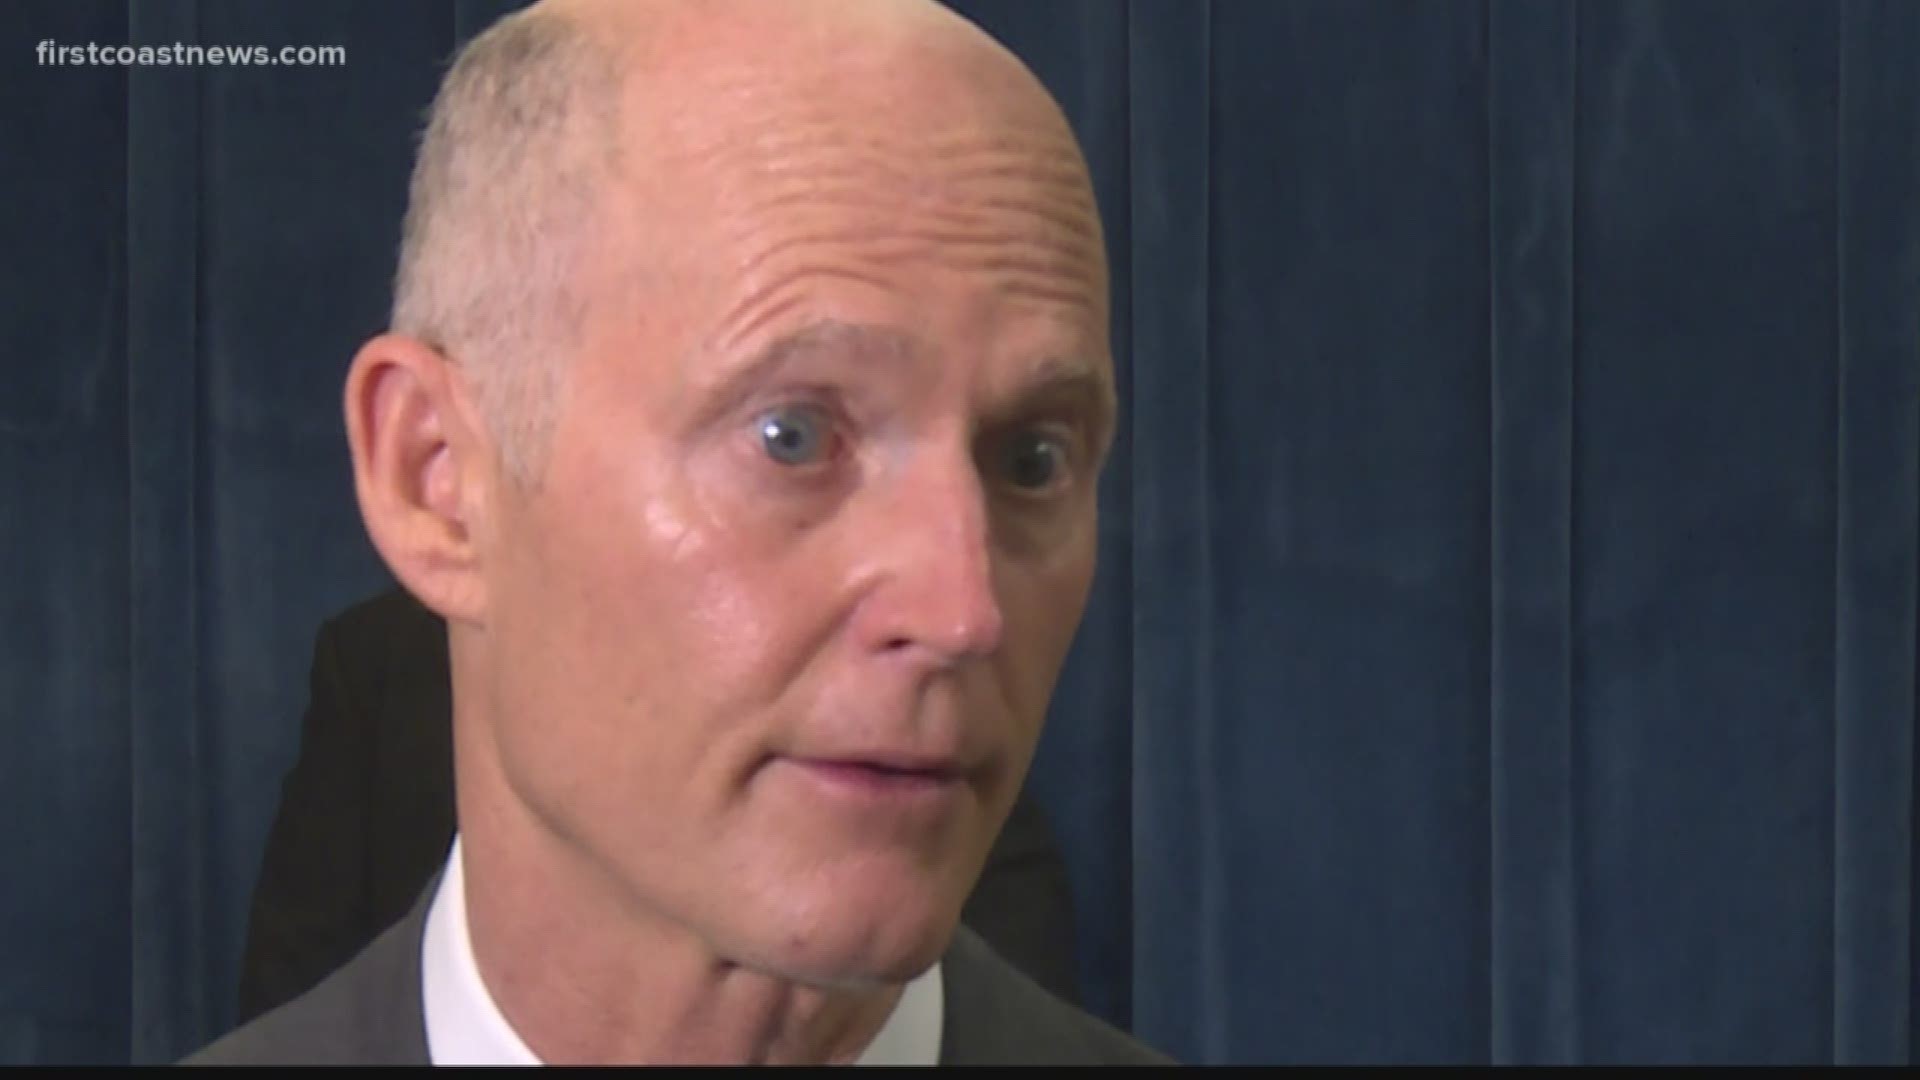 Florida Gov. Rick Scott announced Tuesday in Jacksonville that the state?s crime rate dropped 6 percent in 2017, a 47-year low for the Sunshine State.